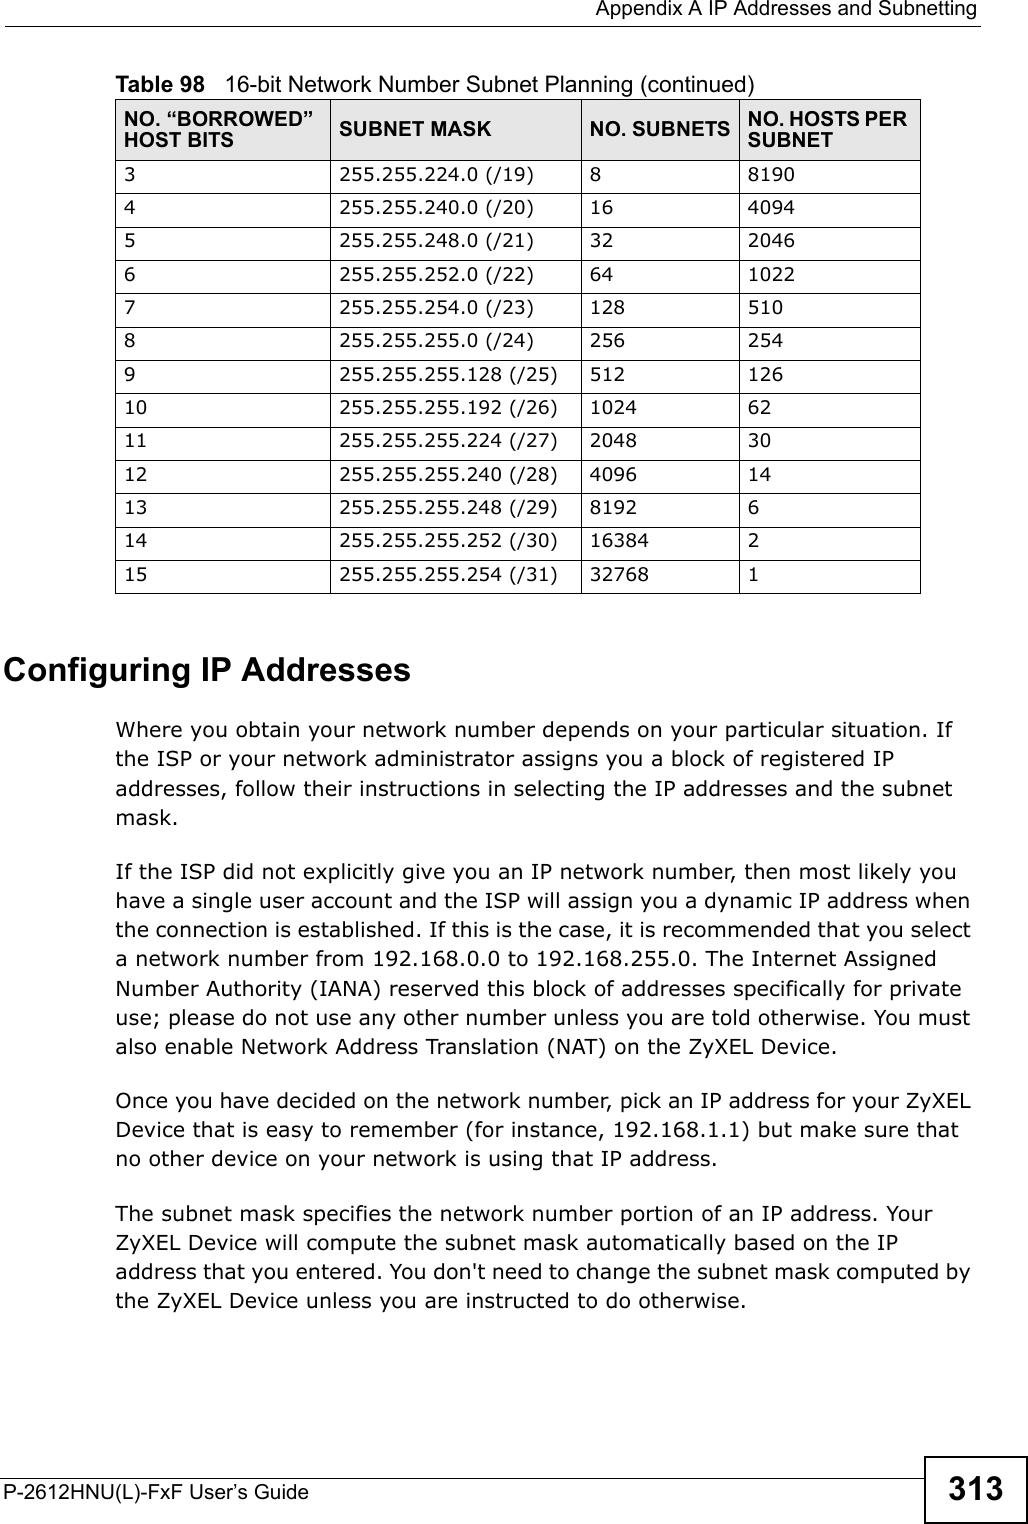  Appendix A IP Addresses and SubnettingP-2612HNU(L)-FxF User’s Guide 313Configuring IP AddressesWhere you obtain your network number depends on your particular situation. If the ISP or your network administrator assigns you a block of registered IP addresses, follow their instructions in selecting the IP addresses and the subnet mask.If the ISP did not explicitly give you an IP network number, then most likely you have a single user account and the ISP will assign you a dynamic IP address when the connection is established. If this is the case, it is recommended that you selecta network number from 192.168.0.0 to 192.168.255.0. The Internet AssignedNumber Authority (IANA) reserved this block of addresses specifically for private use; please do not use any other number unless you are told otherwise. You must also enable Network Address Translation (NAT) on the ZyXEL Device.Once you have decided on the network number, pick an IP address for your ZyXELDevice that is easy to remember (for instance, 192.168.1.1) but make sure that no other device on your network is using that IP address.The subnet mask specifies the network number portion of an IP address. Your ZyXEL Device will compute the subnet mask automatically based on the IP address that you entered. You don&apos;t need to change the subnet mask computed by the ZyXEL Device unless you are instructed to do otherwise.3 255.255.224.0 (/19) 8 81904 255.255.240.0 (/20) 16 40945 255.255.248.0 (/21) 32 20466 255.255.252.0 (/22) 64 10227 255.255.254.0 (/23) 128 5108 255.255.255.0 (/24) 256 2549 255.255.255.128 (/25) 512 12610 255.255.255.192 (/26) 1024 6211 255.255.255.224 (/27) 2048 3012 255.255.255.240 (/28) 4096 1413 255.255.255.248 (/29) 8192 614 255.255.255.252 (/30) 16384 215 255.255.255.254 (/31) 32768 1Table 98   16-bit Network Number Subnet Planning (continued)NO. “BORROWED” HOST BITS SUBNET MASK NO. SUBNETS NO. HOSTS PER SUBNET